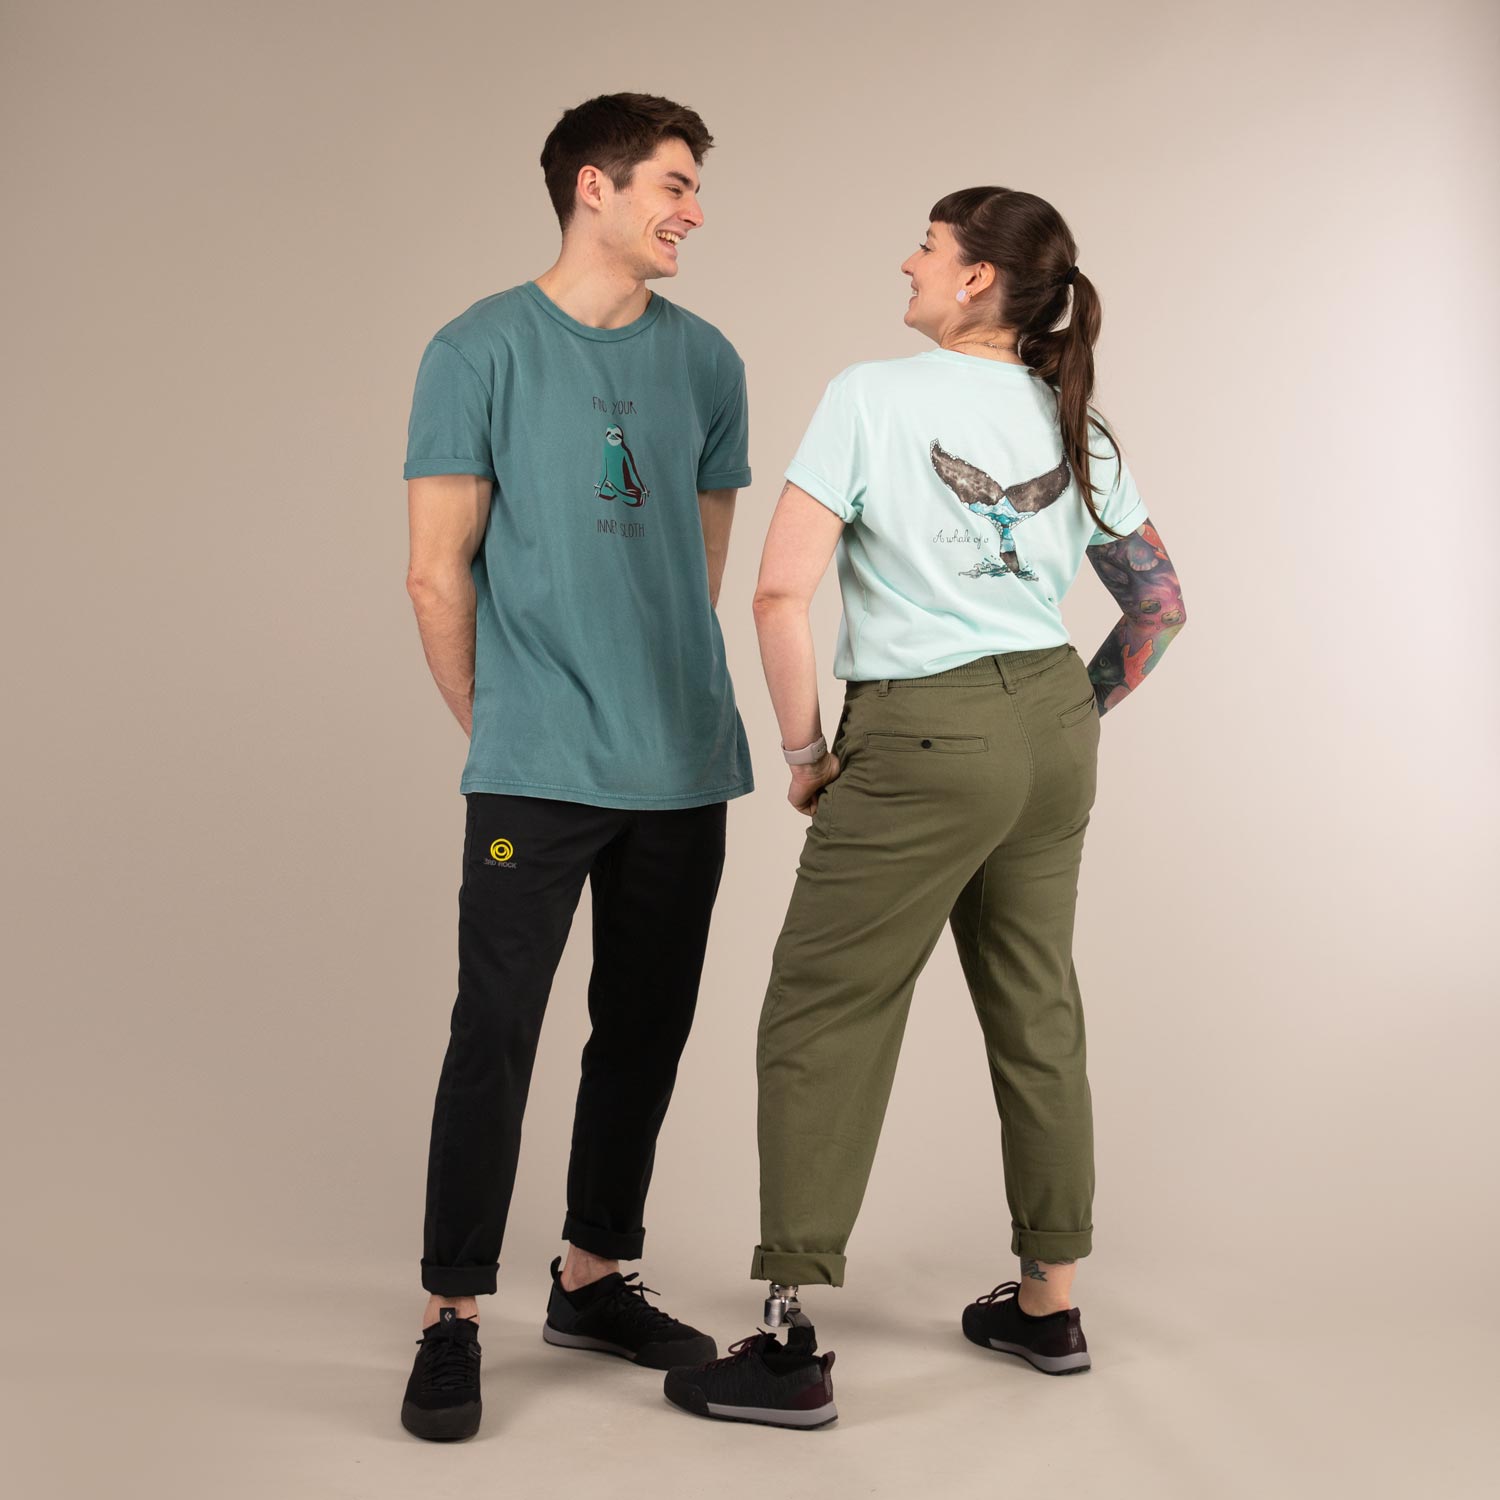 LARK Chinos | Organic Cotton Flexible Chinos | 3RD ROCK Clothing -  Laura is 5ft 6 with a 31" waist, 43" hips and wears a size 32/RL. Billy is 5ft 11 with a 30" waist, 37" hips and wears a 30/RL